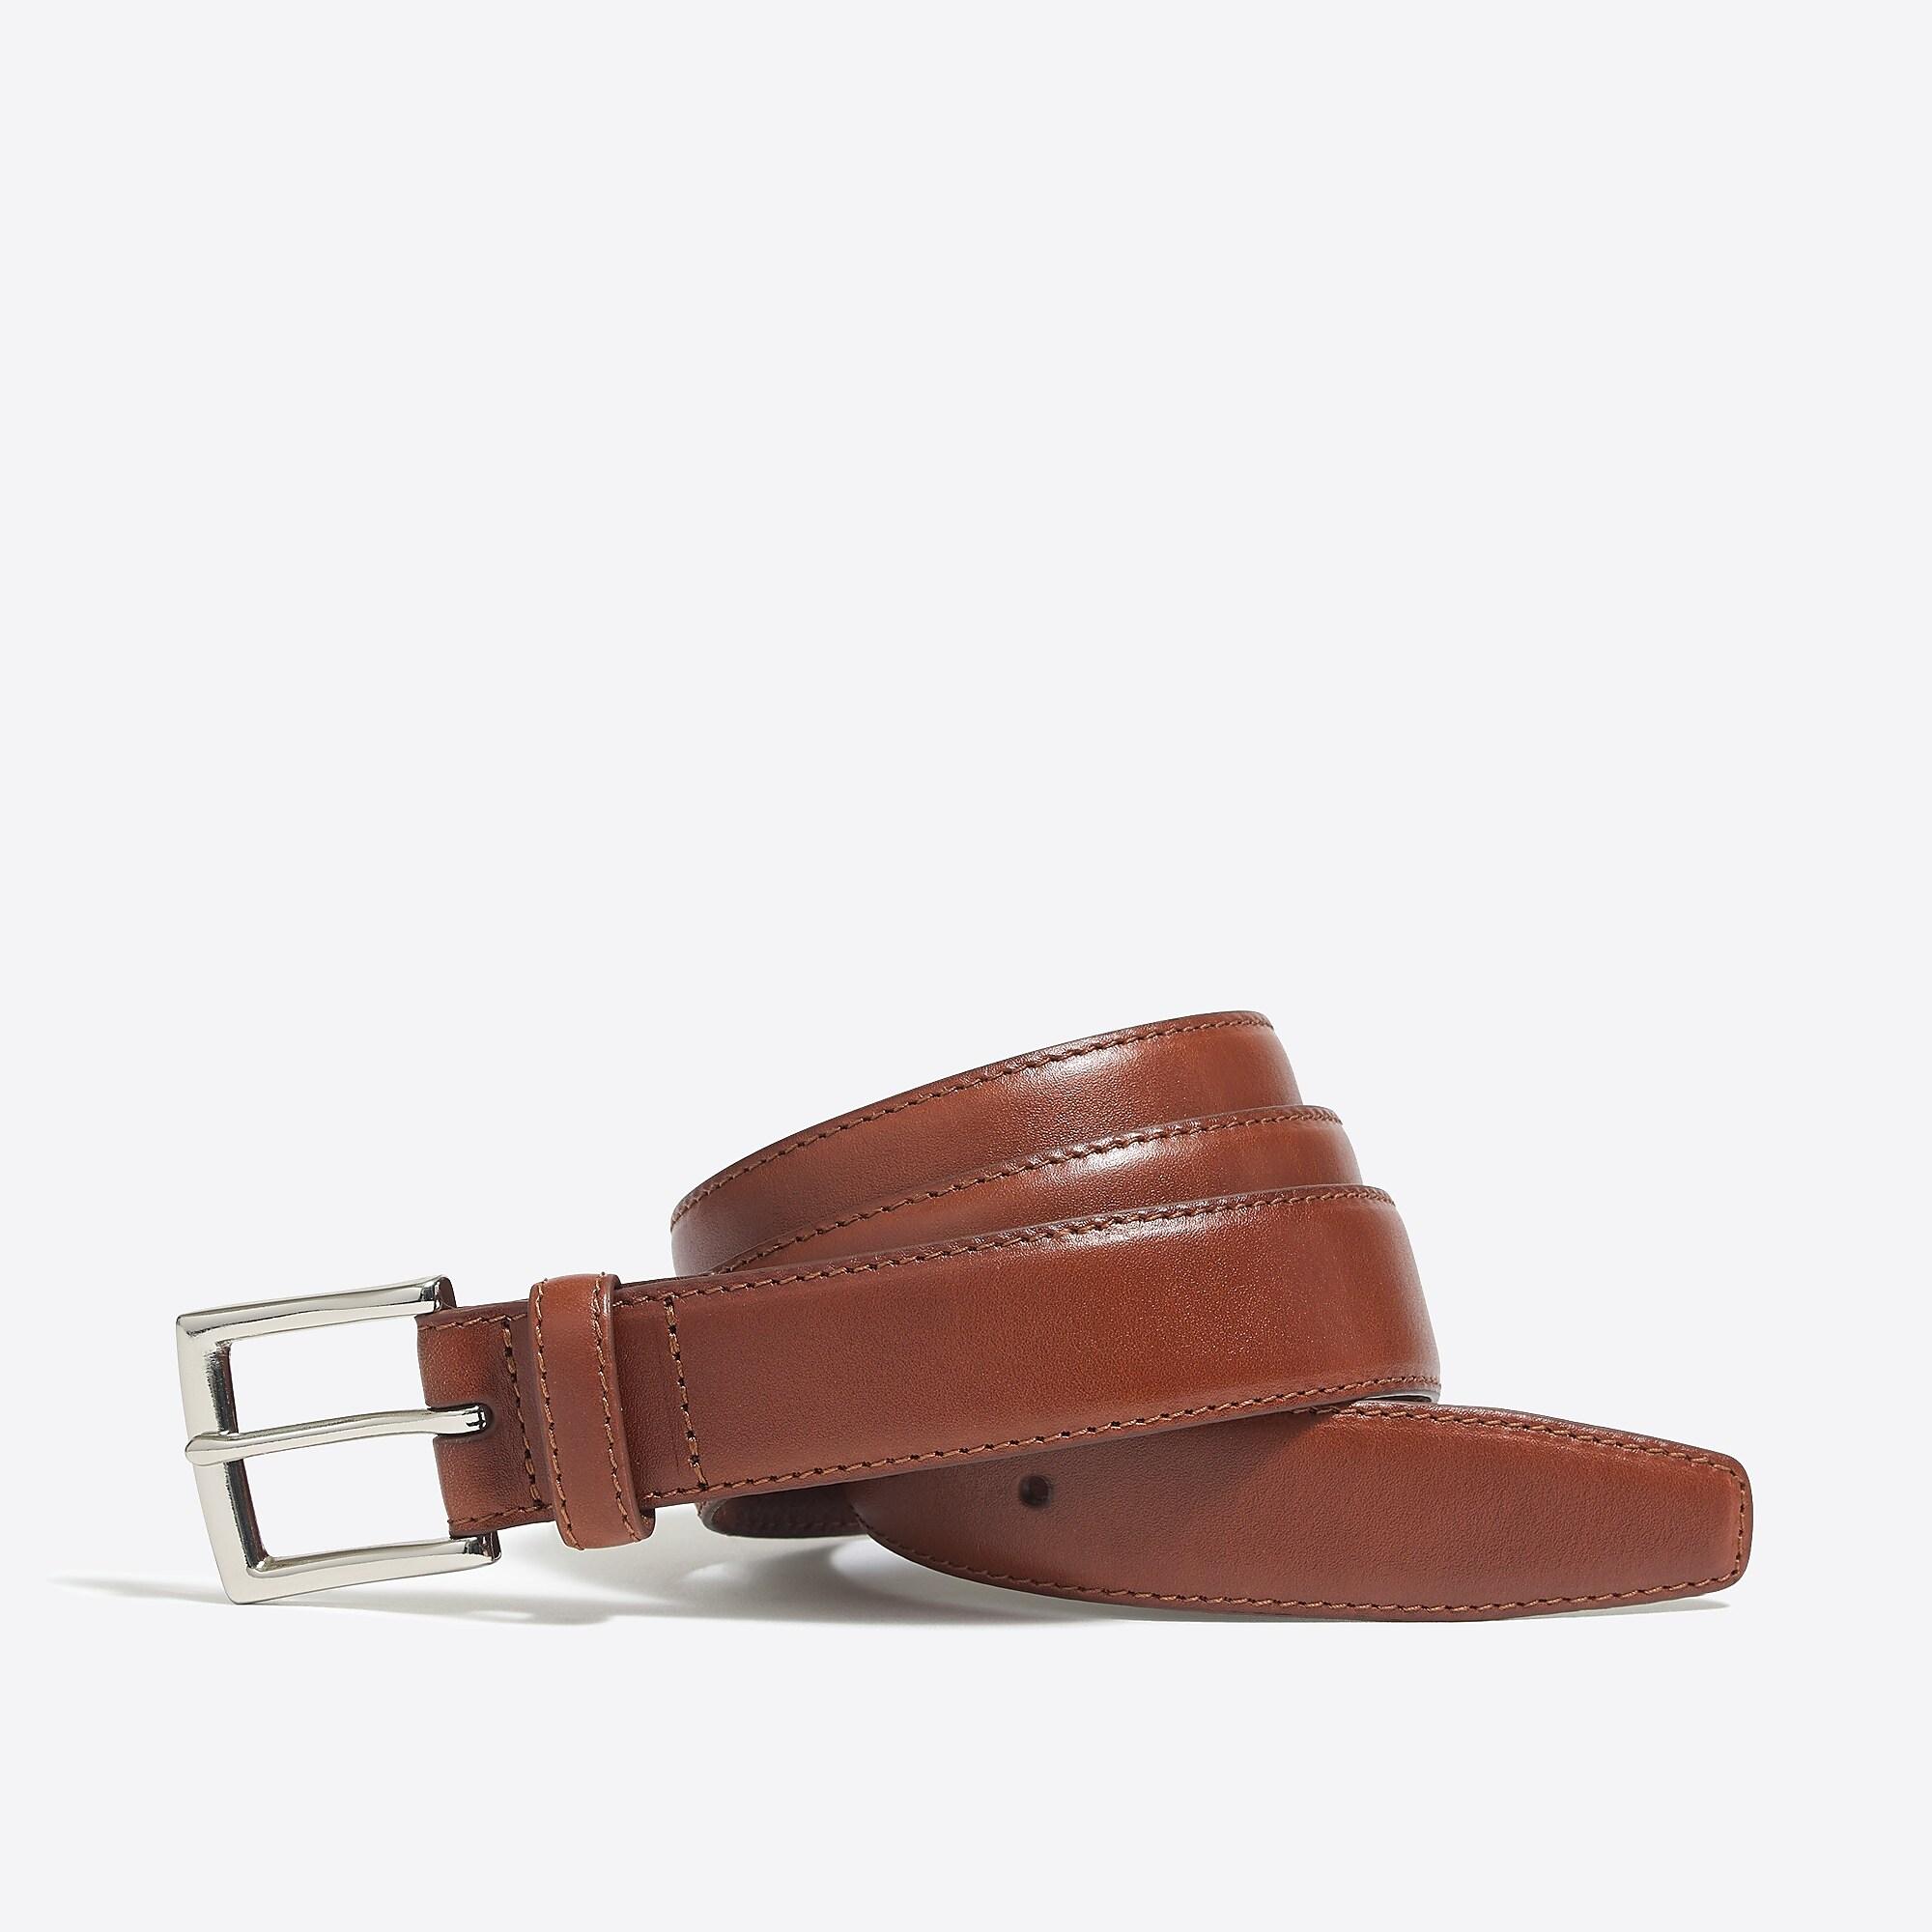 J.Crew Classic Leather Dress Belt in Brown for Men - Lyst